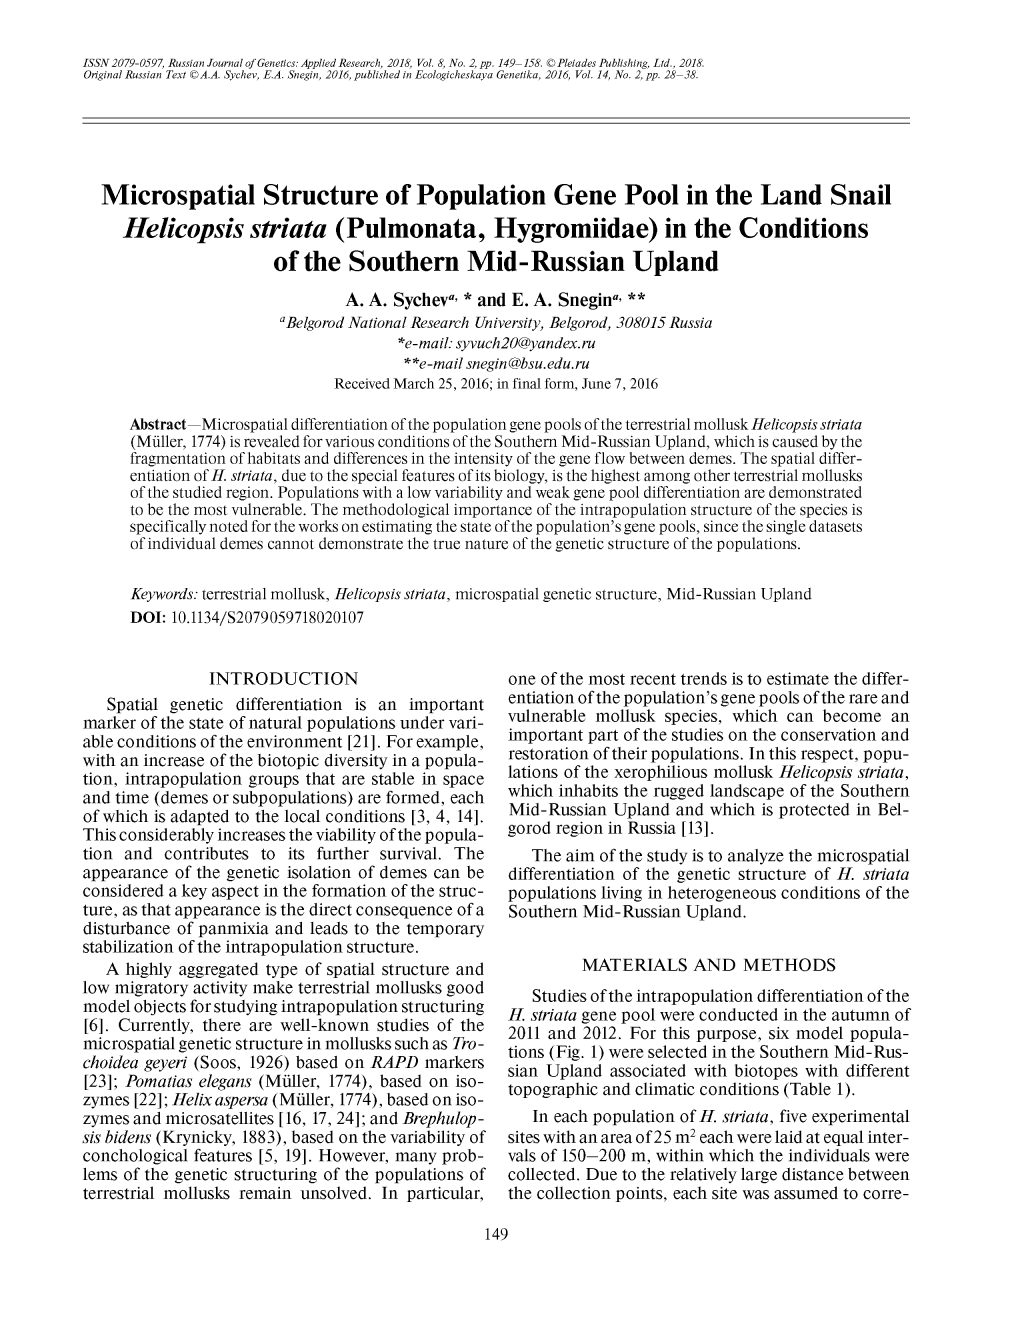 Microspatial Structure of Population Gene Pool in the Land Snail Helicopsis Striata (Pulmonata, Hygromiidae) in the Conditions of the Southern Mid-Russian Upland A